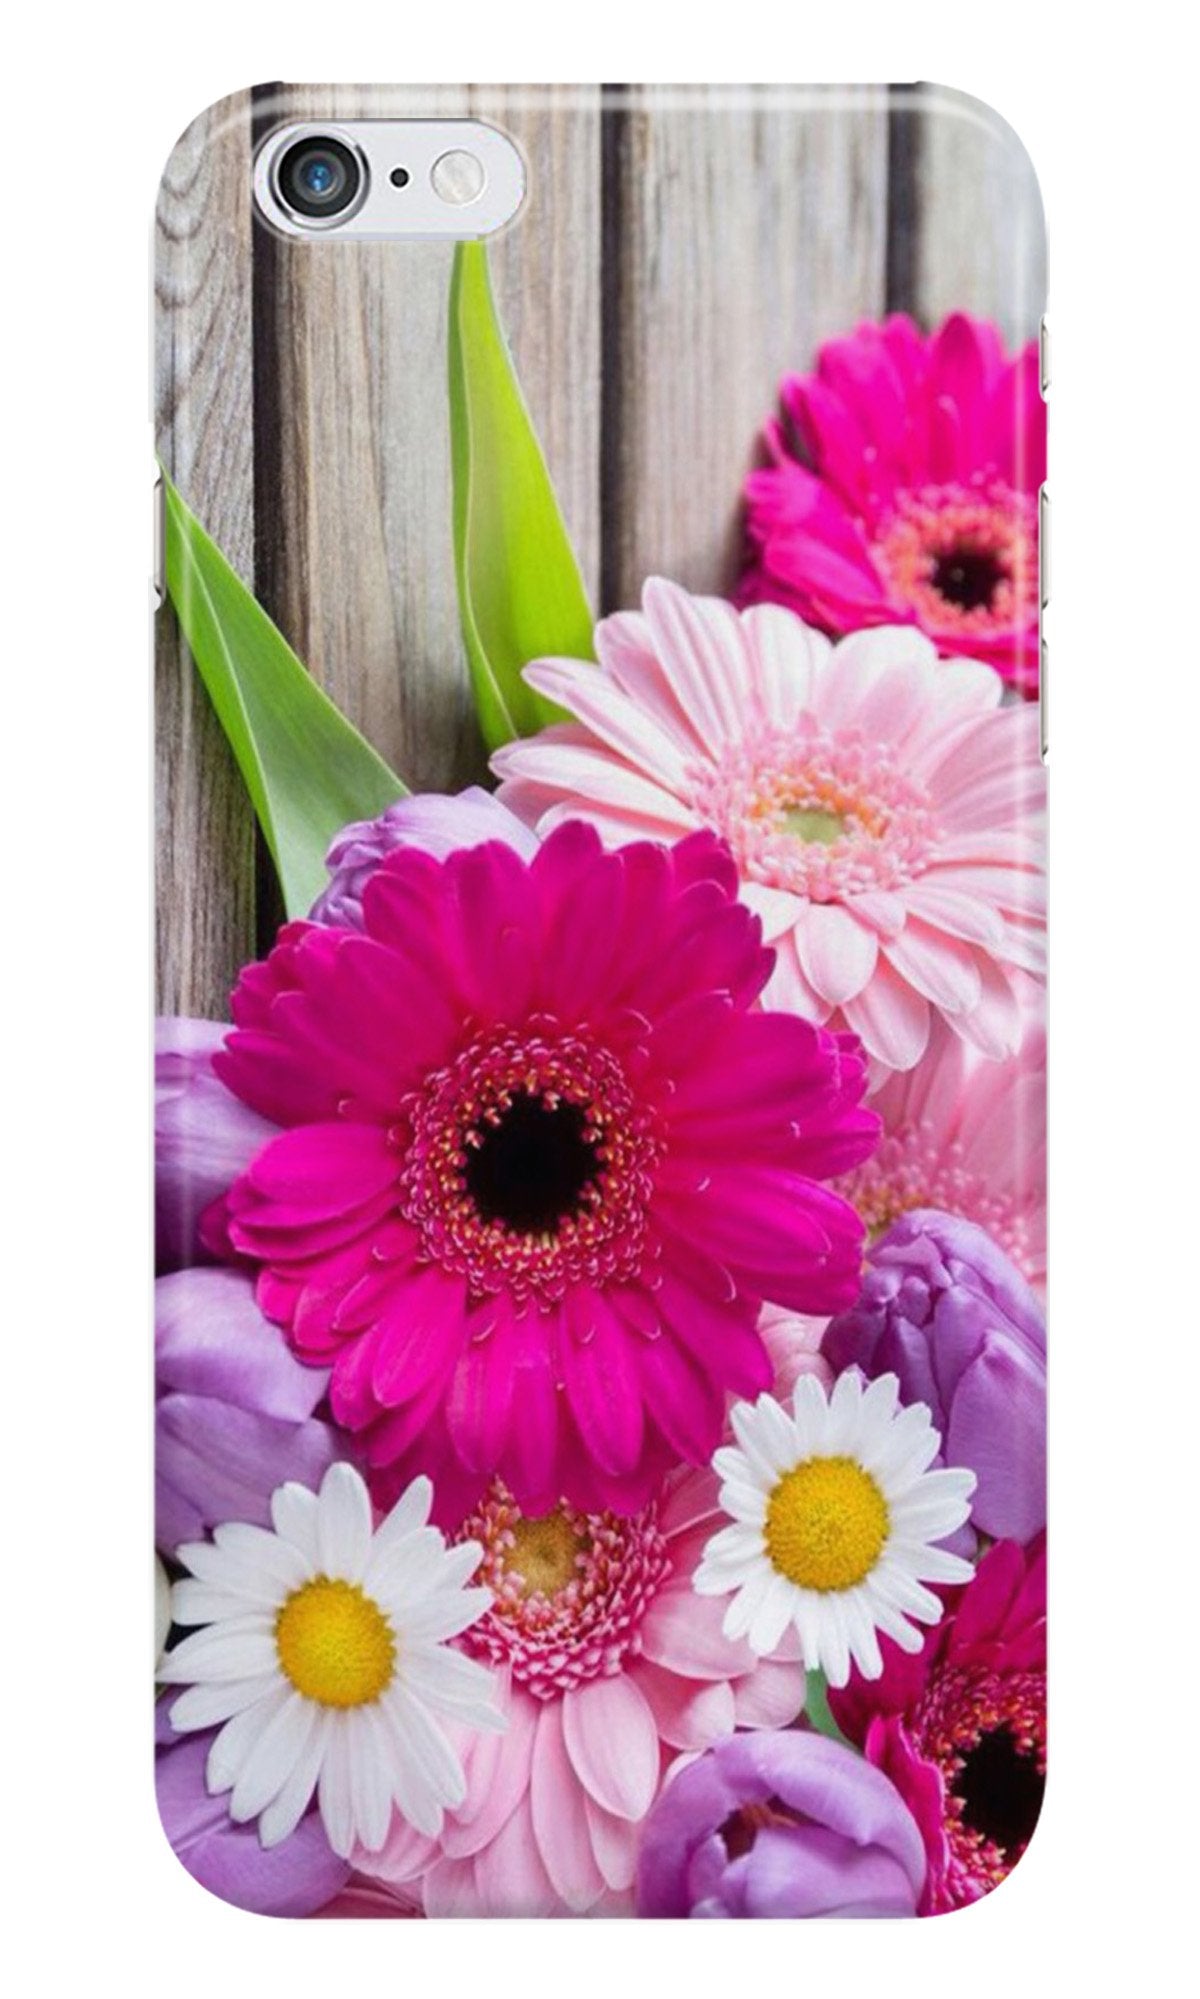 Coloful Daisy2 Case for iPhone 6 Plus/ 6s Plus